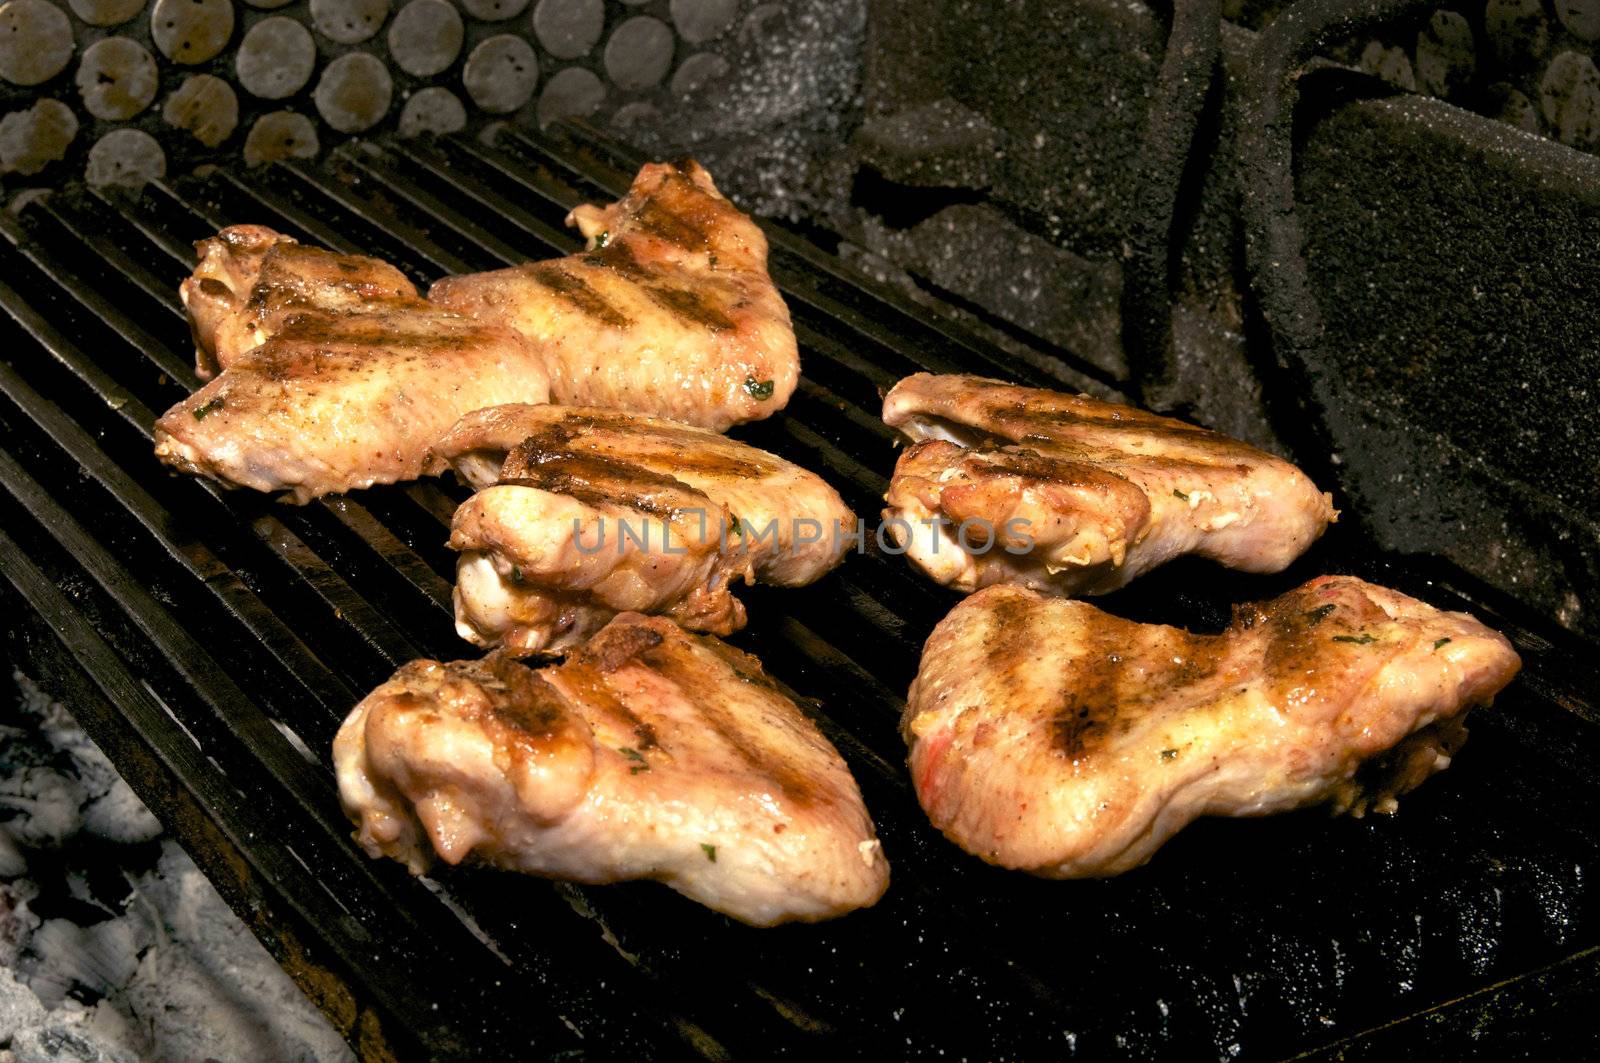 chicken wings are fried on the grill